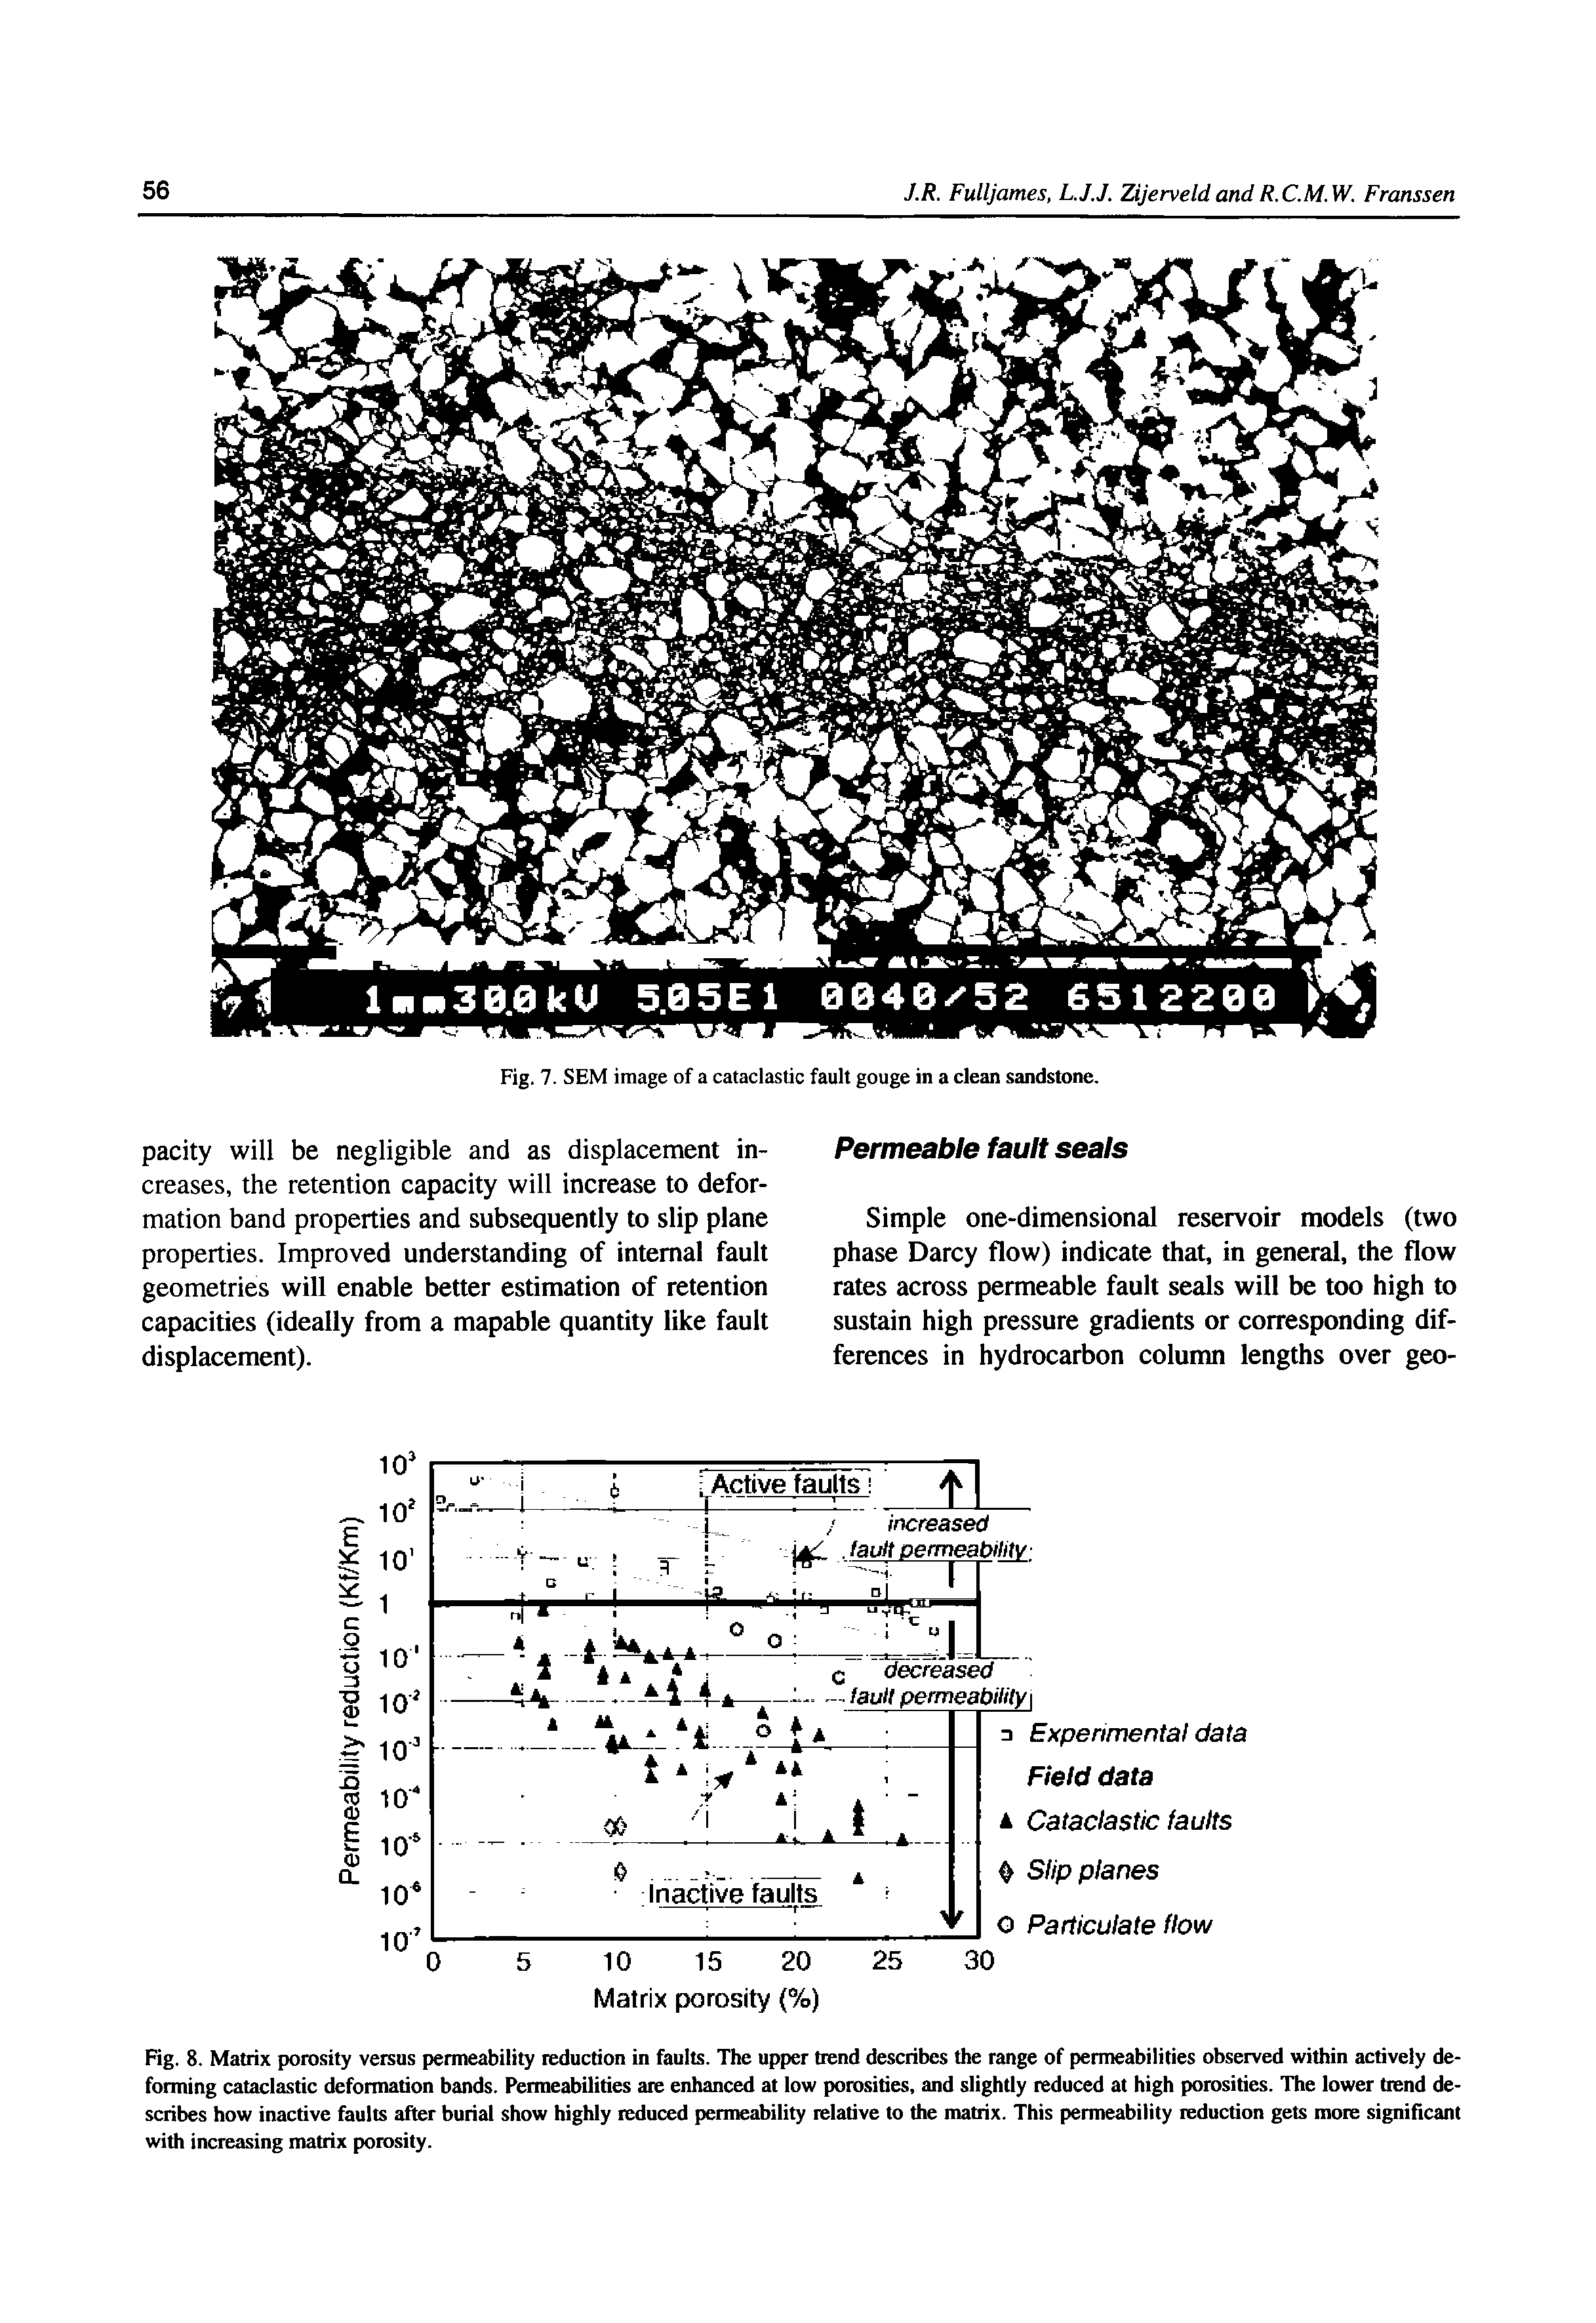 Fig. 8. Matrix porosity versus permeability reduction in faults. The upper trend describes the range of permeabilities observed within actively deforming cataclastic deformation bands. Permeabilities ate enhanced at low porosities, and slightly reduced at high porosities. The lower trend describes how inactive faults after burial show highly reduced permeability relative to the matrix. This permeability reduction gets more significant with increasing matrix porosity.